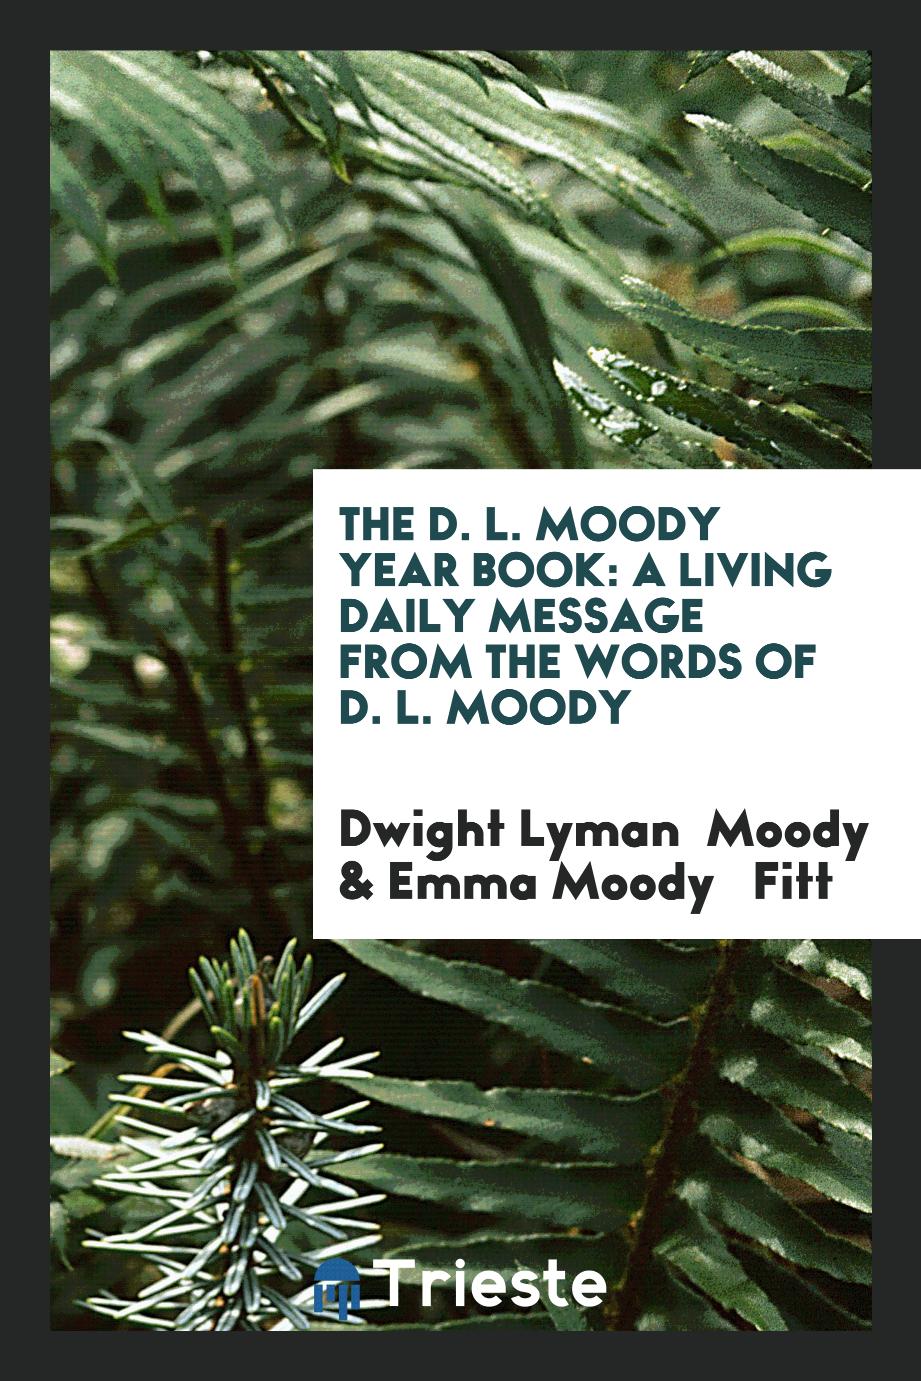 The D. L. Moody Year Book: A Living Daily Message from the Words of D. L. Moody